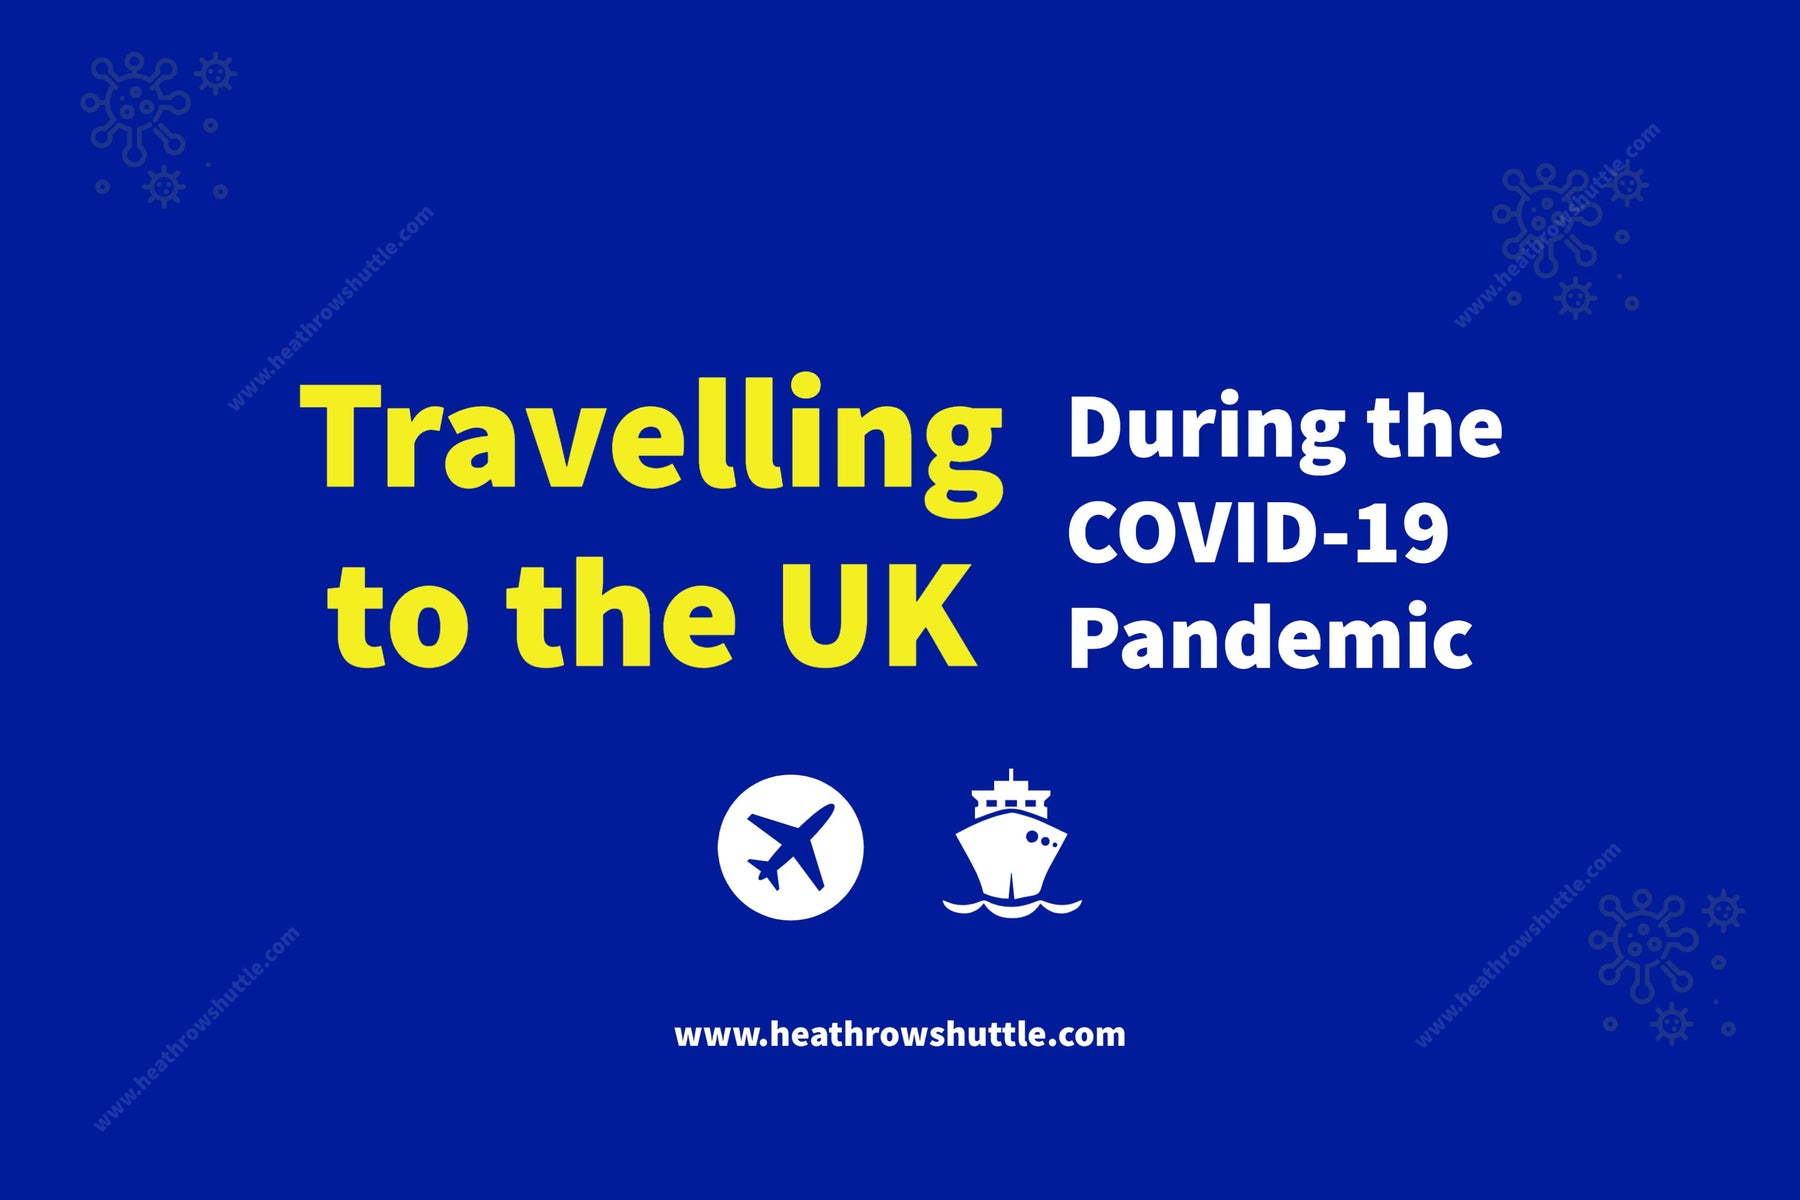 Travelling to and from UK during COVID-19 Pandemic